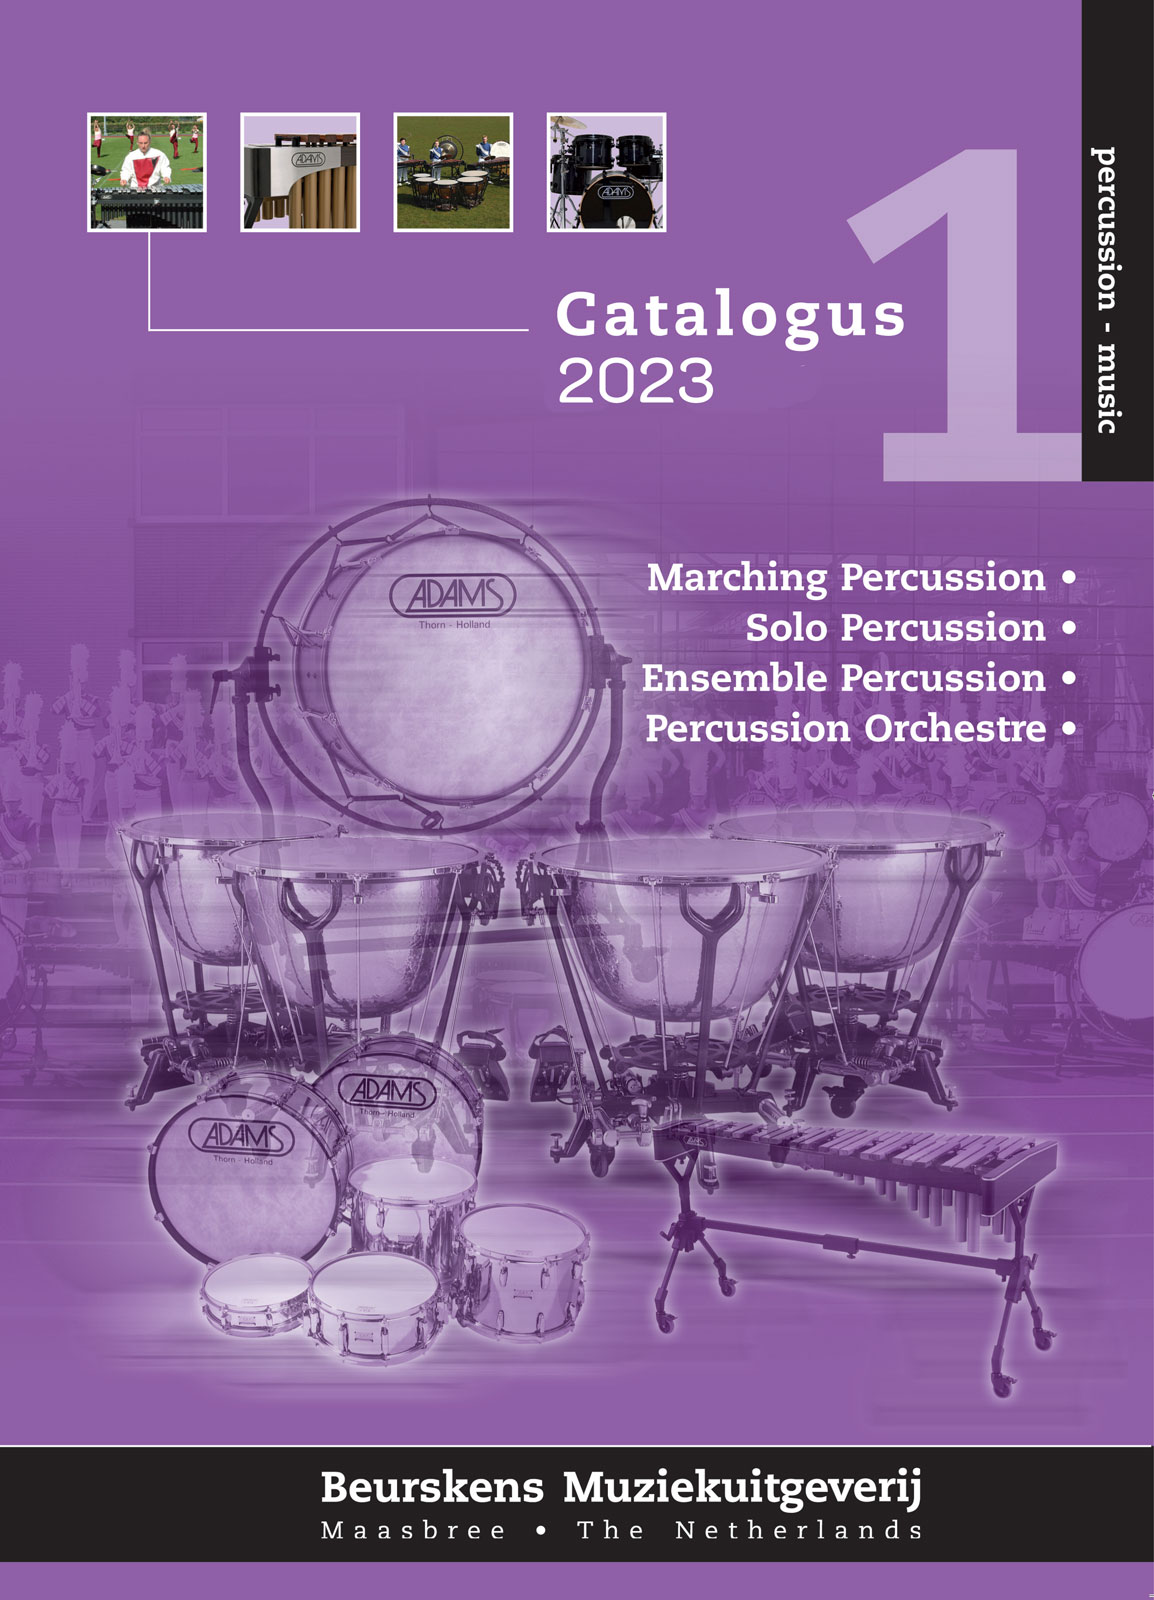 beurskens-catalogus-front-2021-1